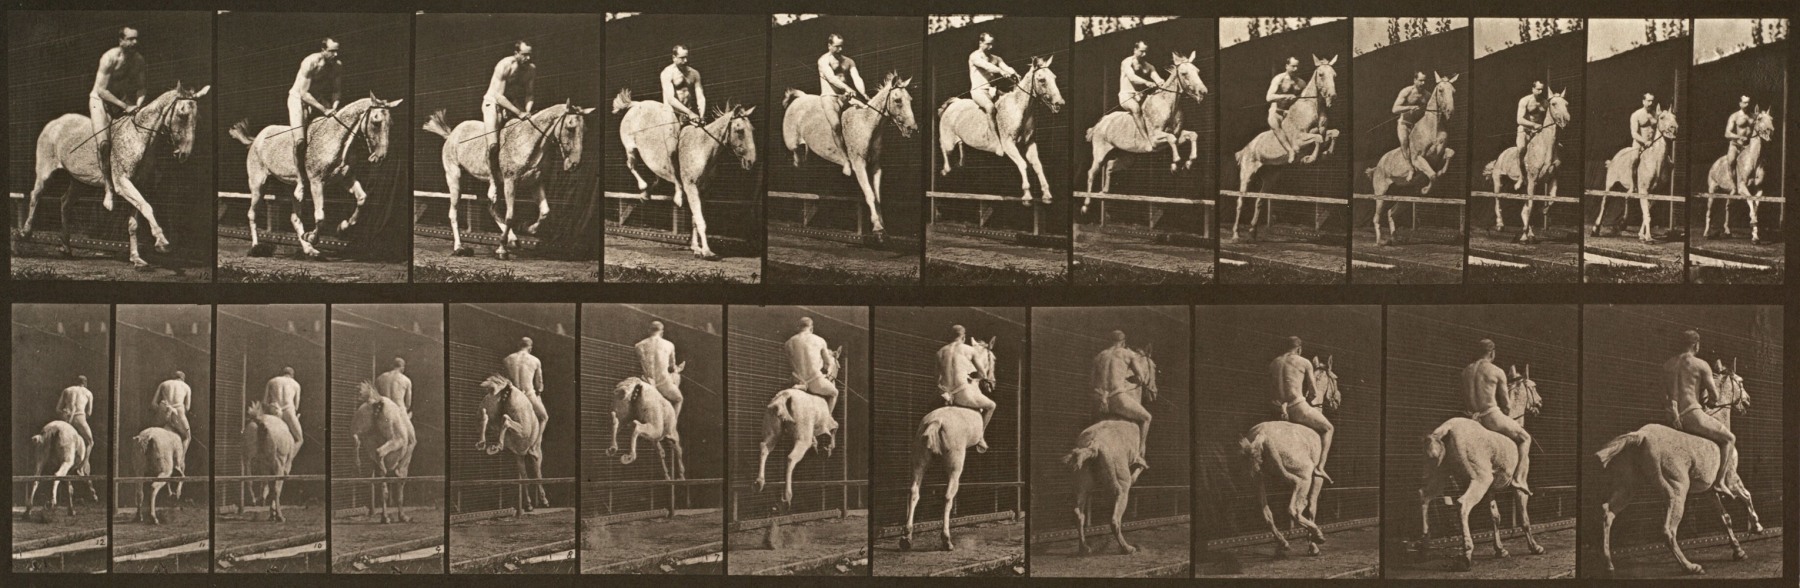 Sequence of black and white photos showing the movements of a  horse and rider jumping a hurdle